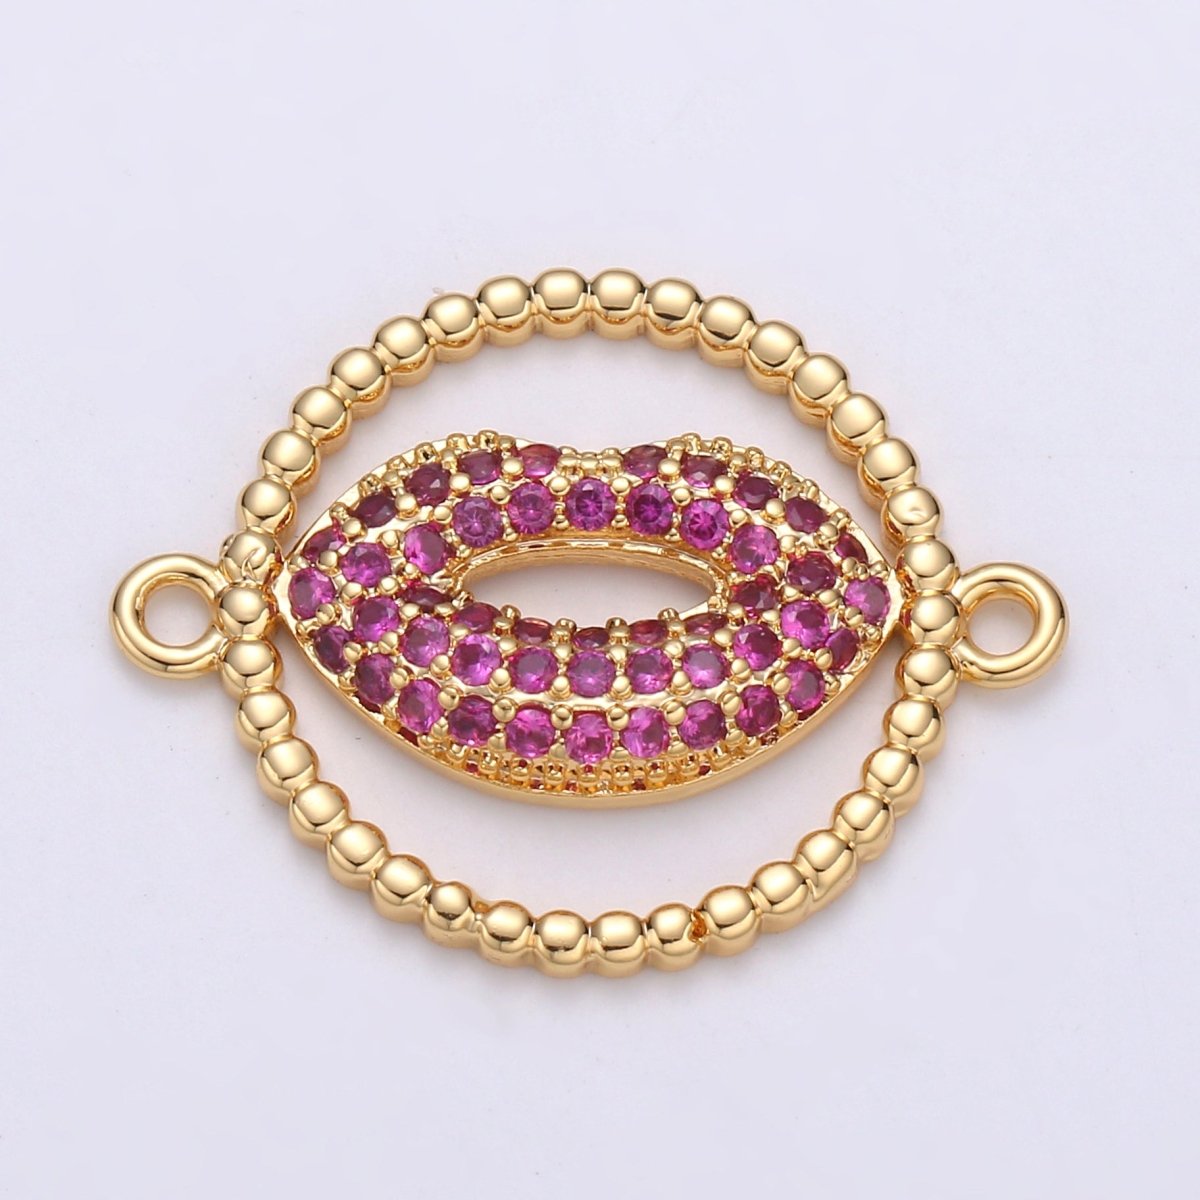 14k Gold Filled XOXO Kiss Mark Lips Connector Charm - Red Lips mwah muah, hugs and kisses, friendship love Jewelry Supply Bracelet Necklace F-554 - DLUXCA